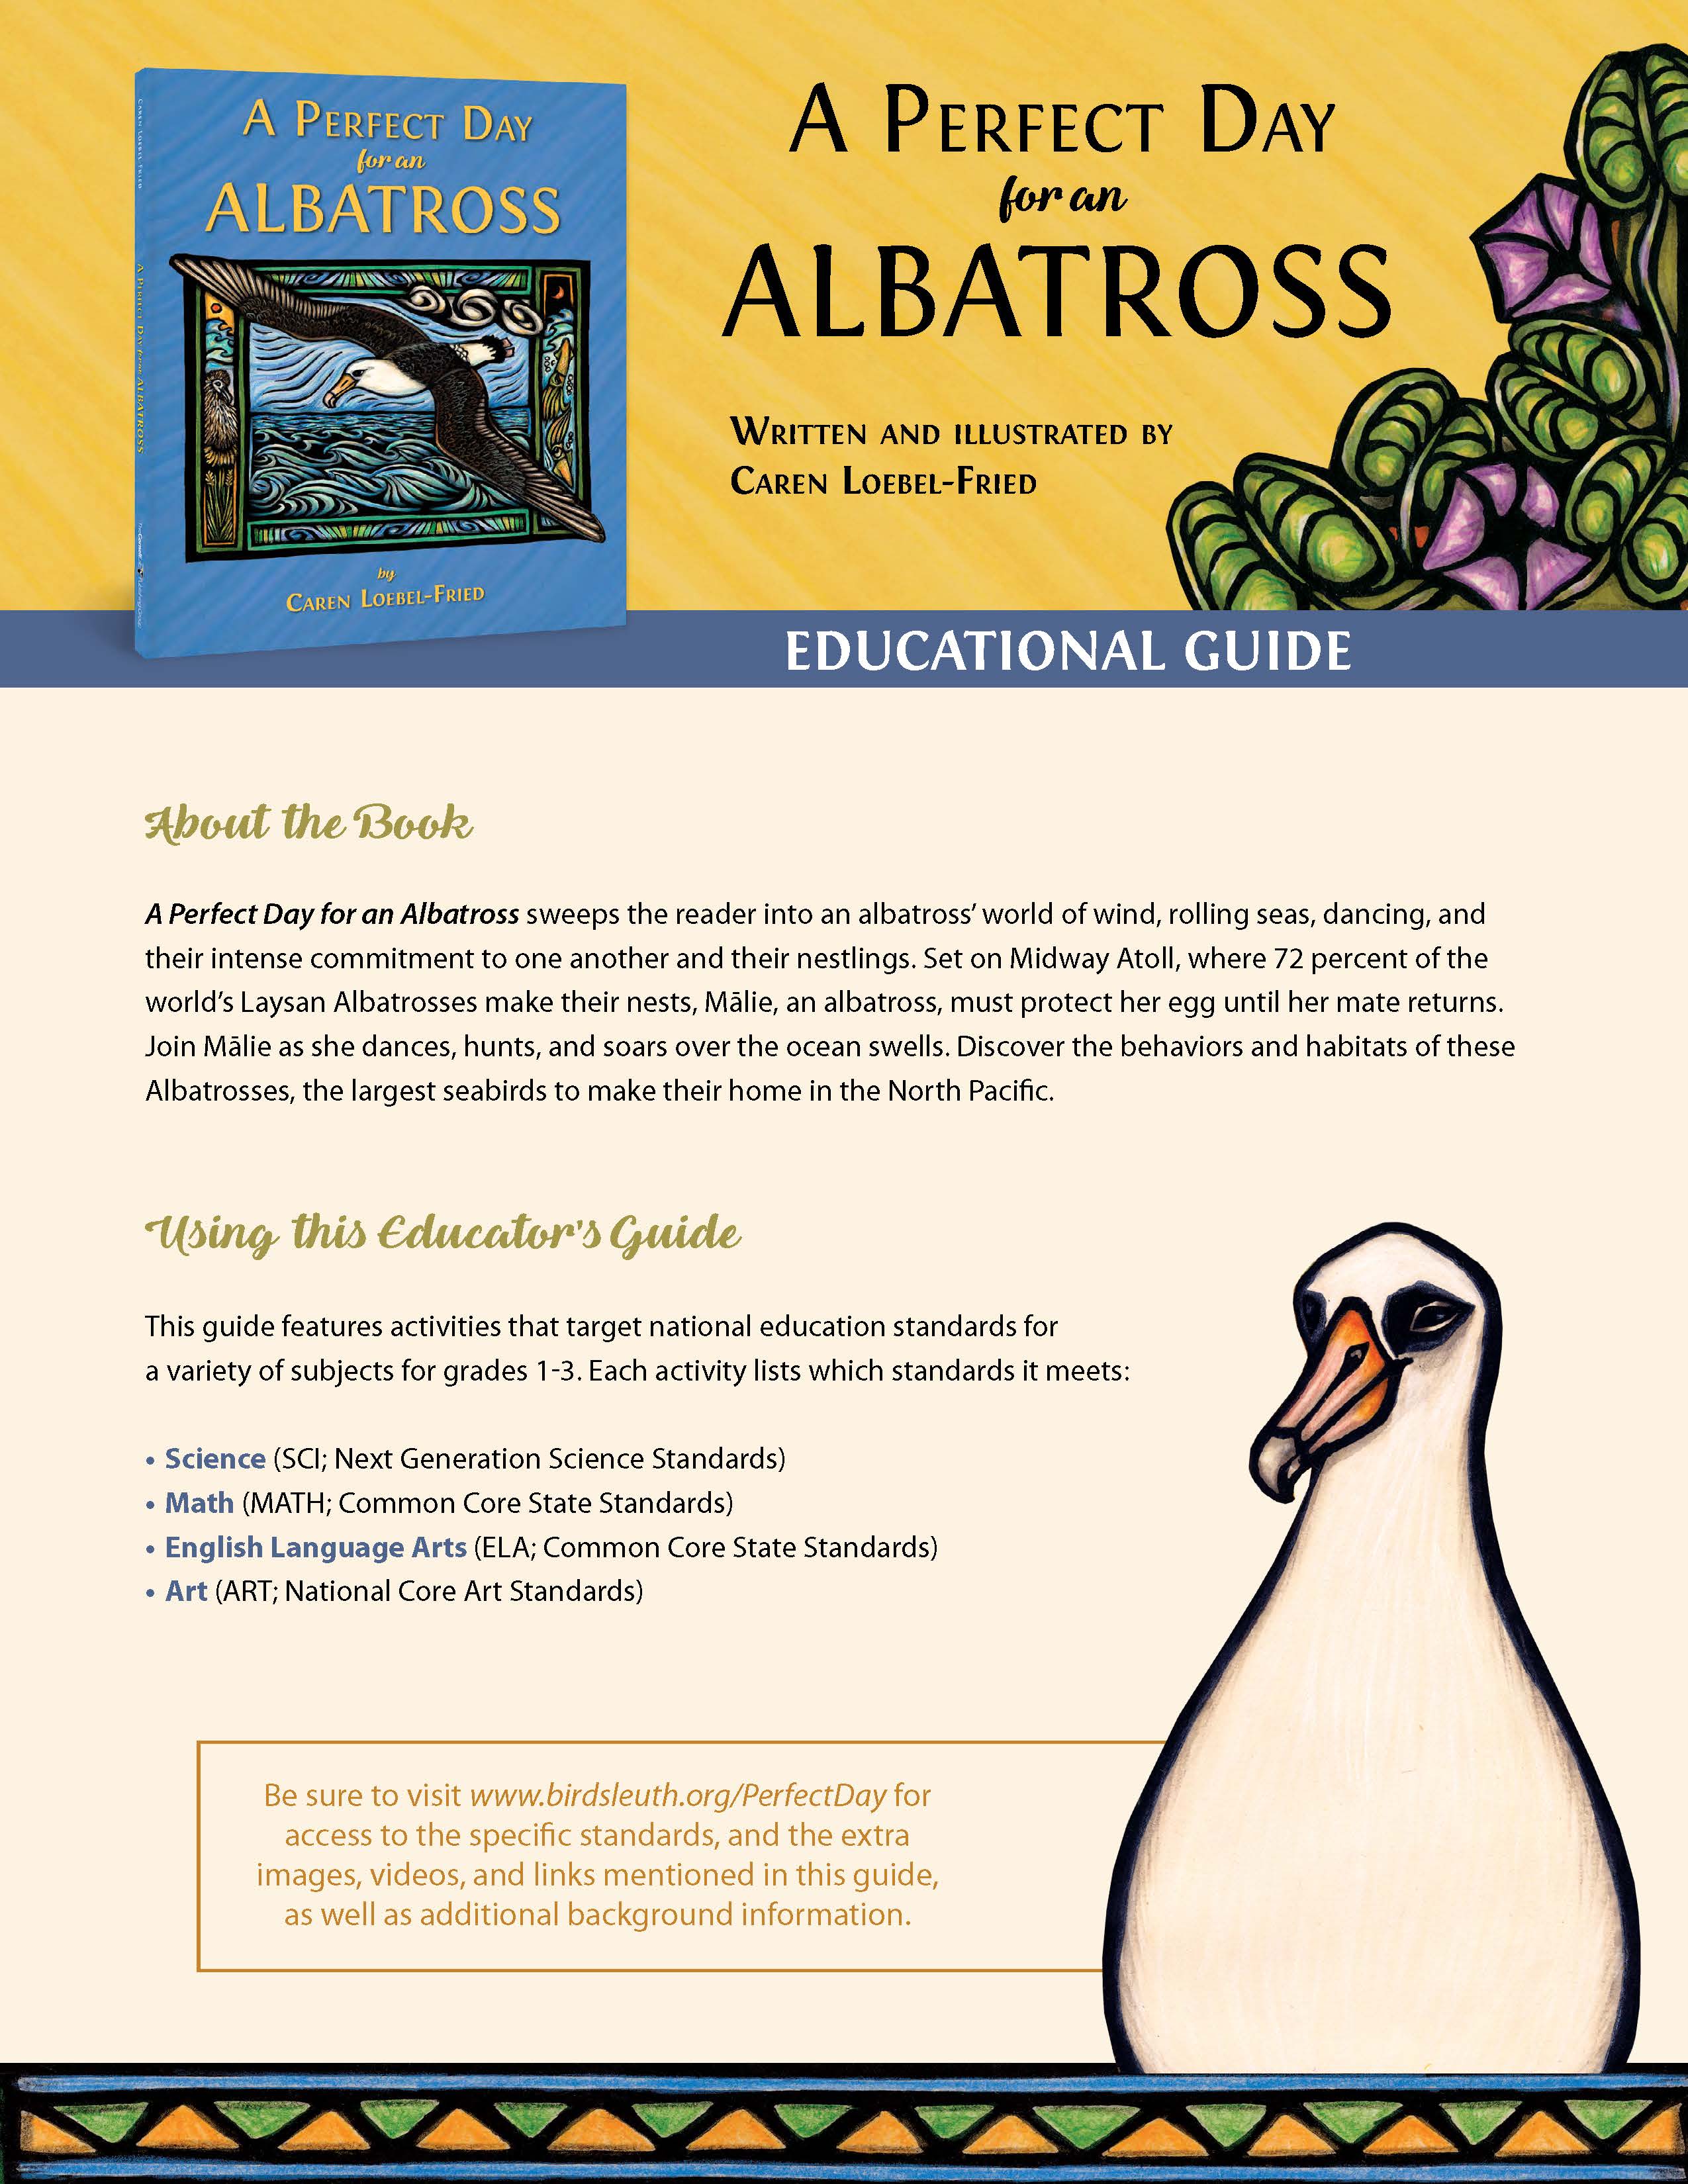 A Perfect Day for an Albatross overview which can be accessed via the guide overview and supplemental materials link next to this image.